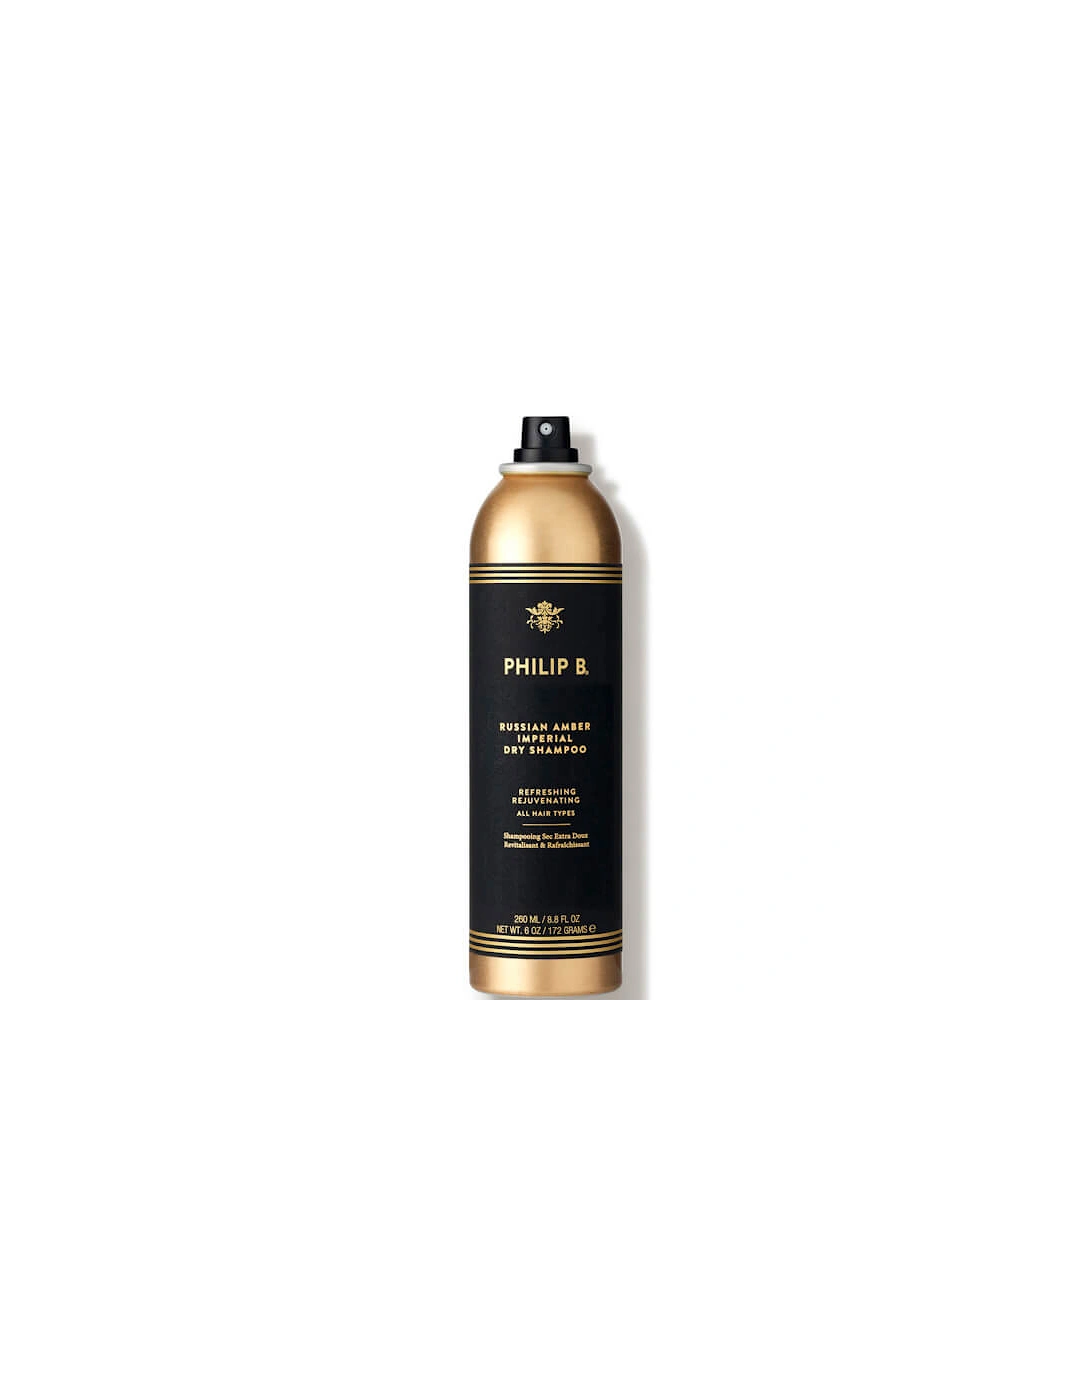 Russian Amber Imperial Dry Shampoo (260ml), 2 of 1